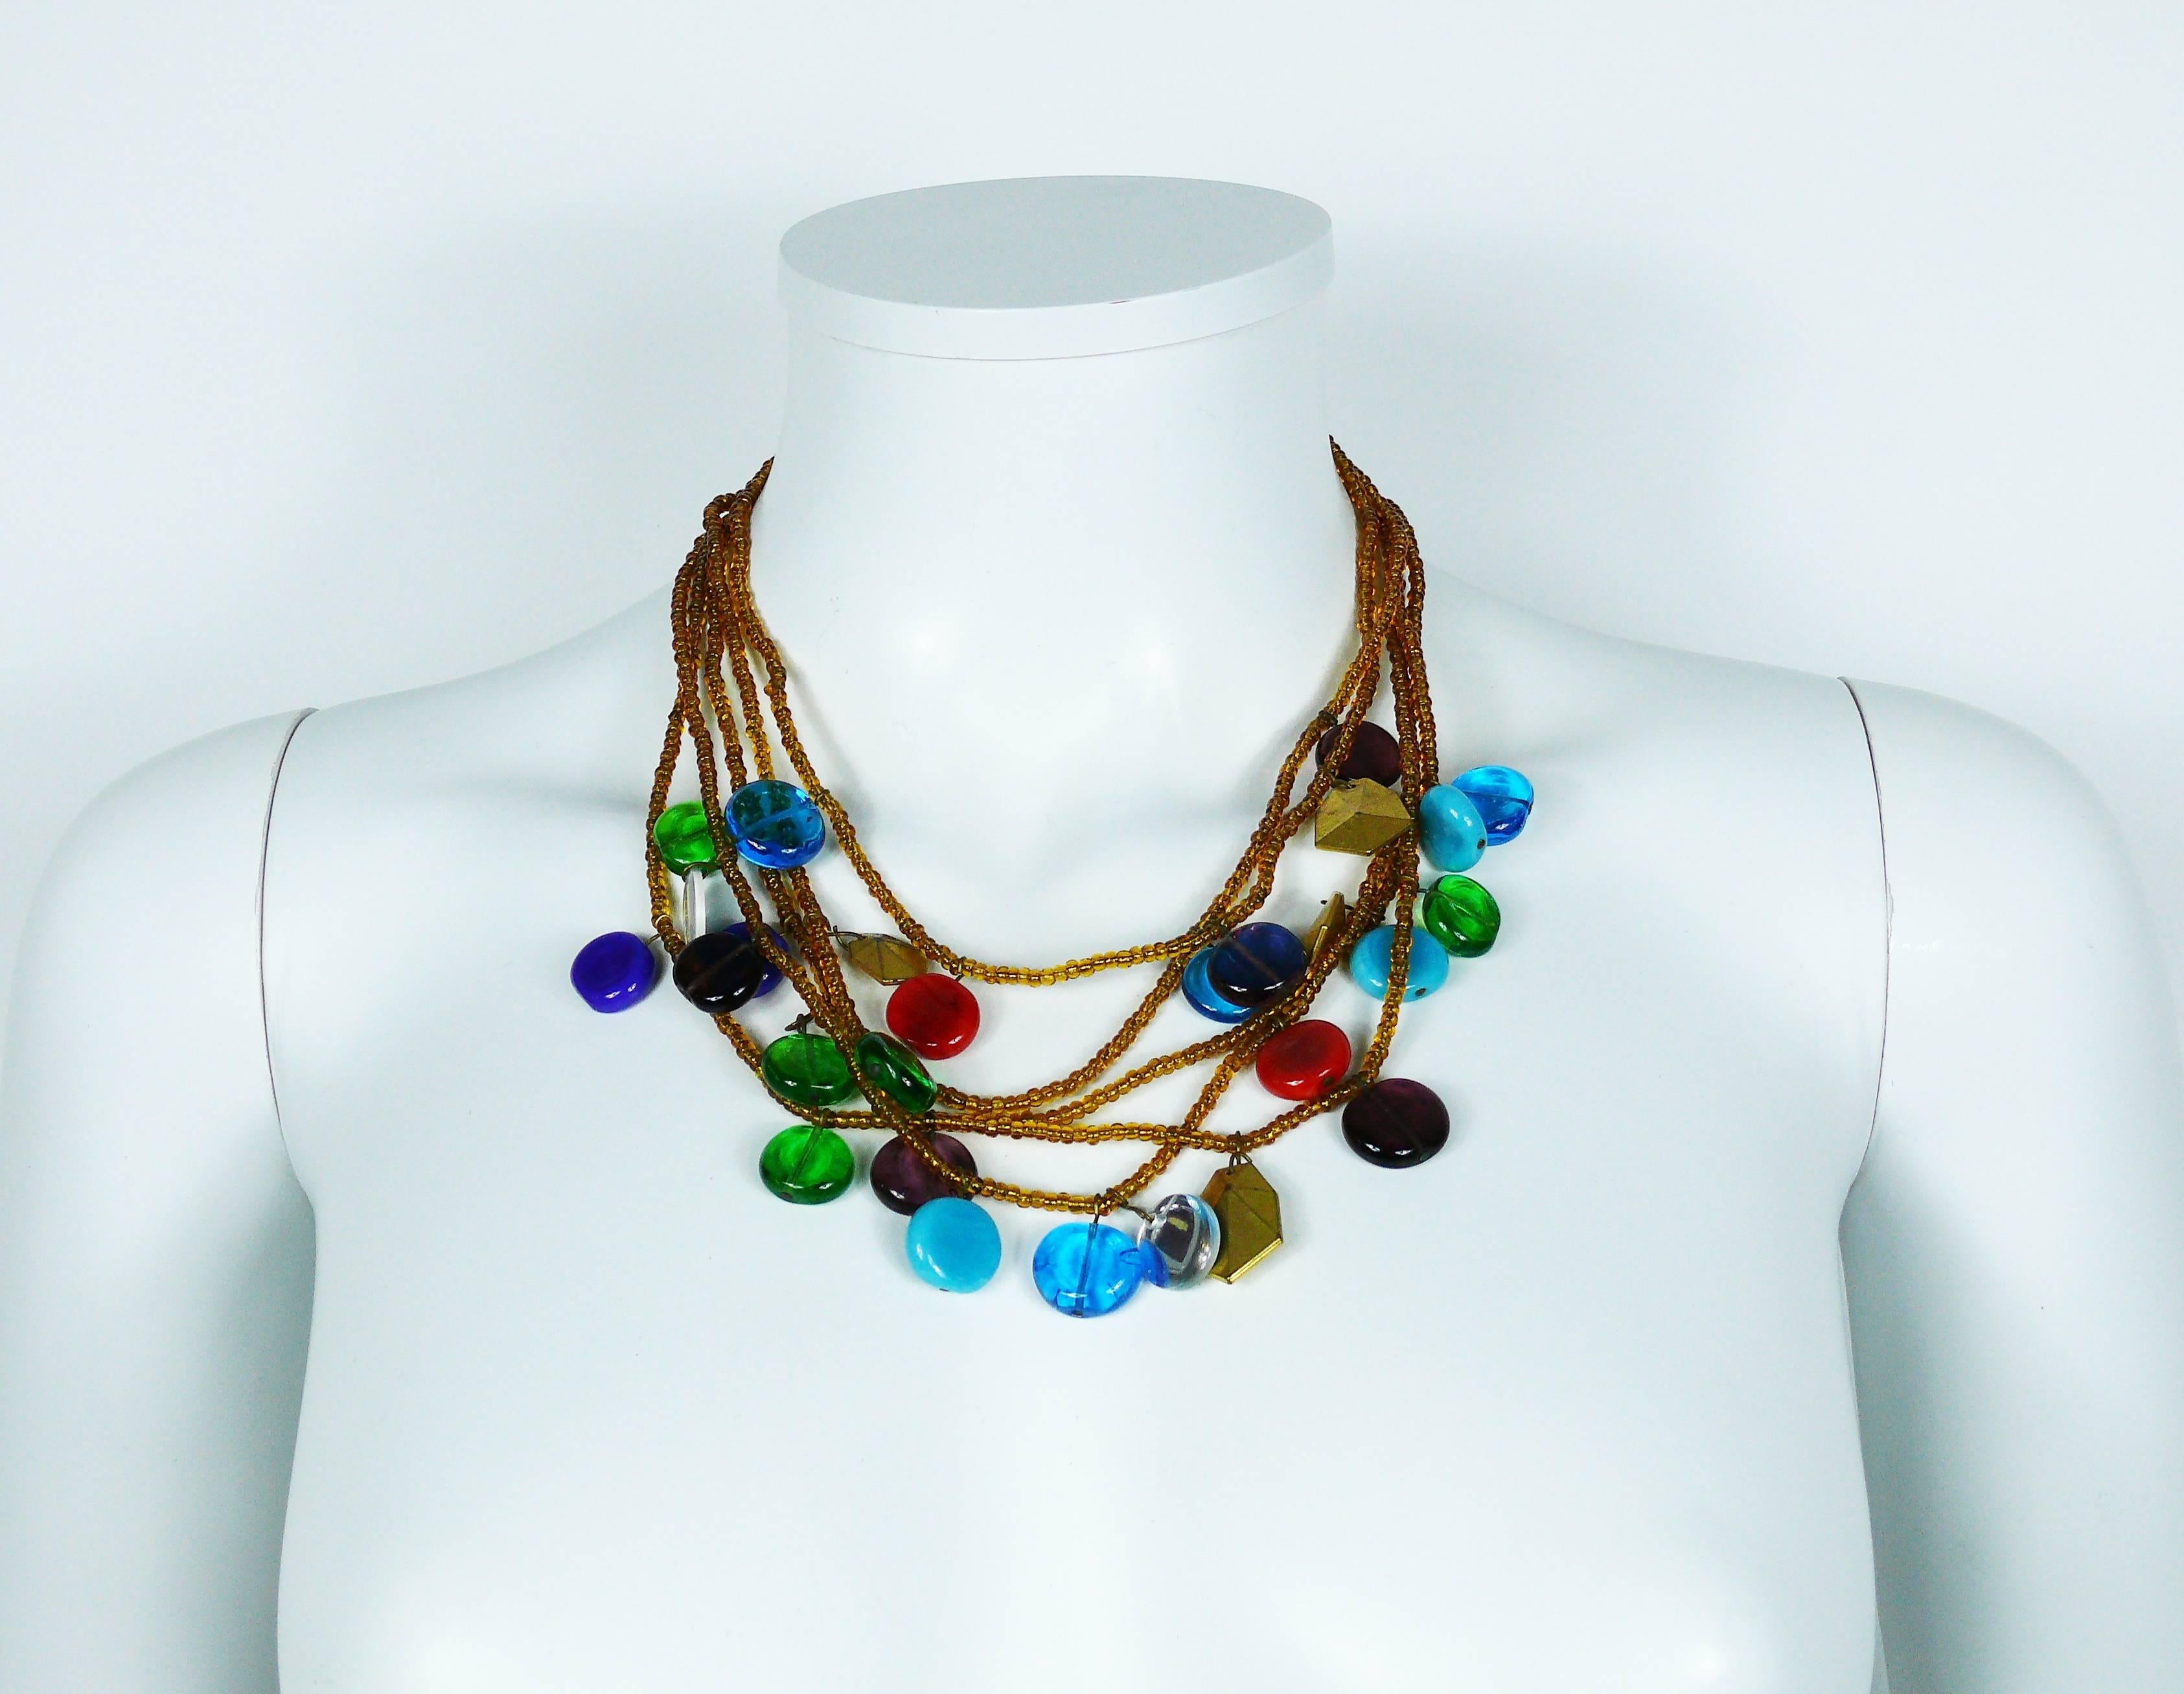 YVES SAINT LAURENT vintage rare multi strand beaded necklace featuring multicolored pate de verre, mirrored and gold toned charms.

This is an early YVES SAINT LAURENT piece of costume jewelry, most probably from the 70s-80s.

Gorgeous blue poured